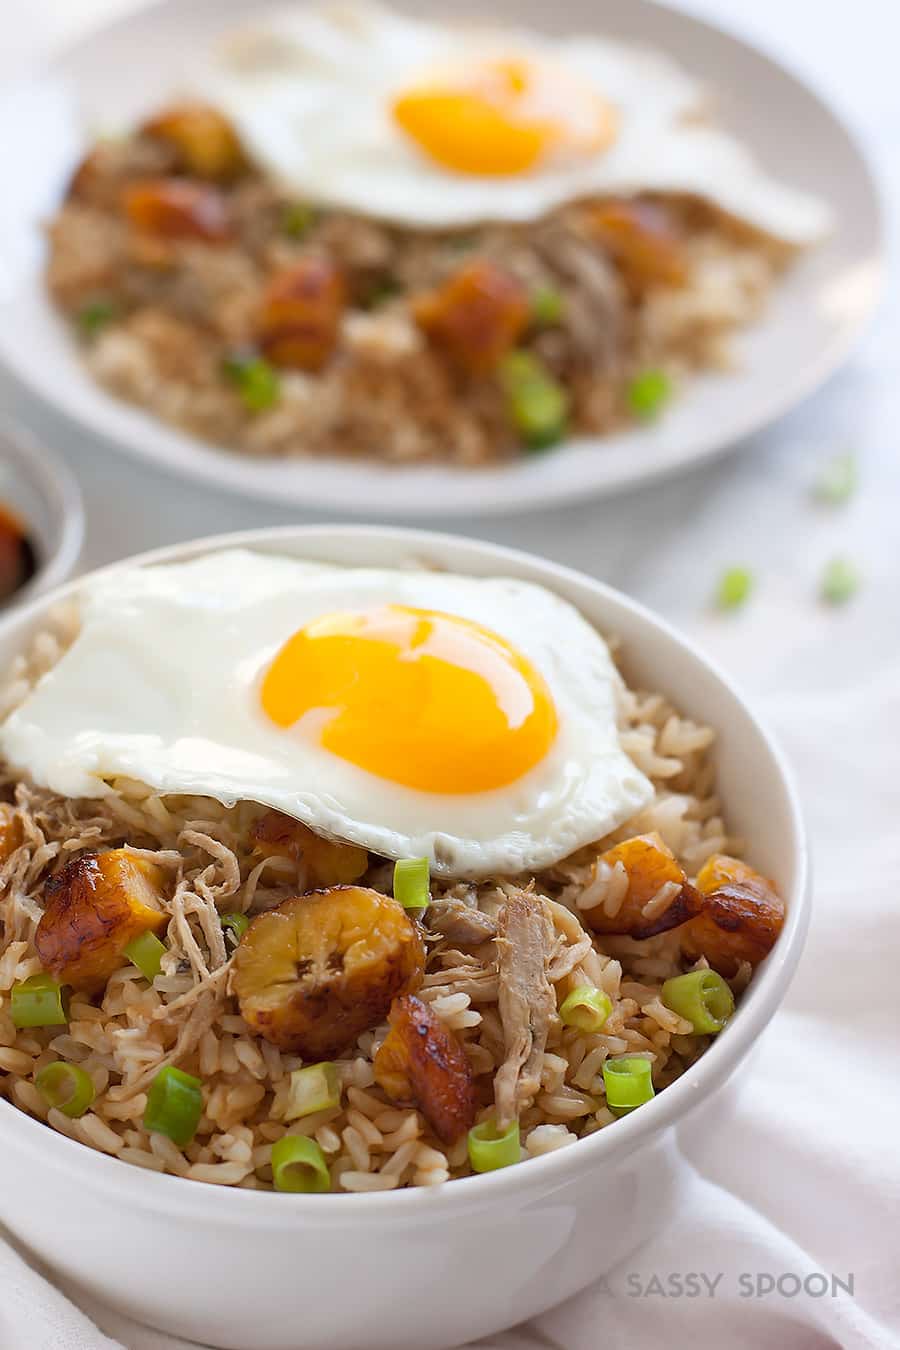 Easy Cuban Pork Fried Brown Rice. Brown rice with Cuban-style pulled pork, chopped sweet plantains, scallions, and a fried egg. An easy 20-minute meal using leftover pulled pork and brown rice!